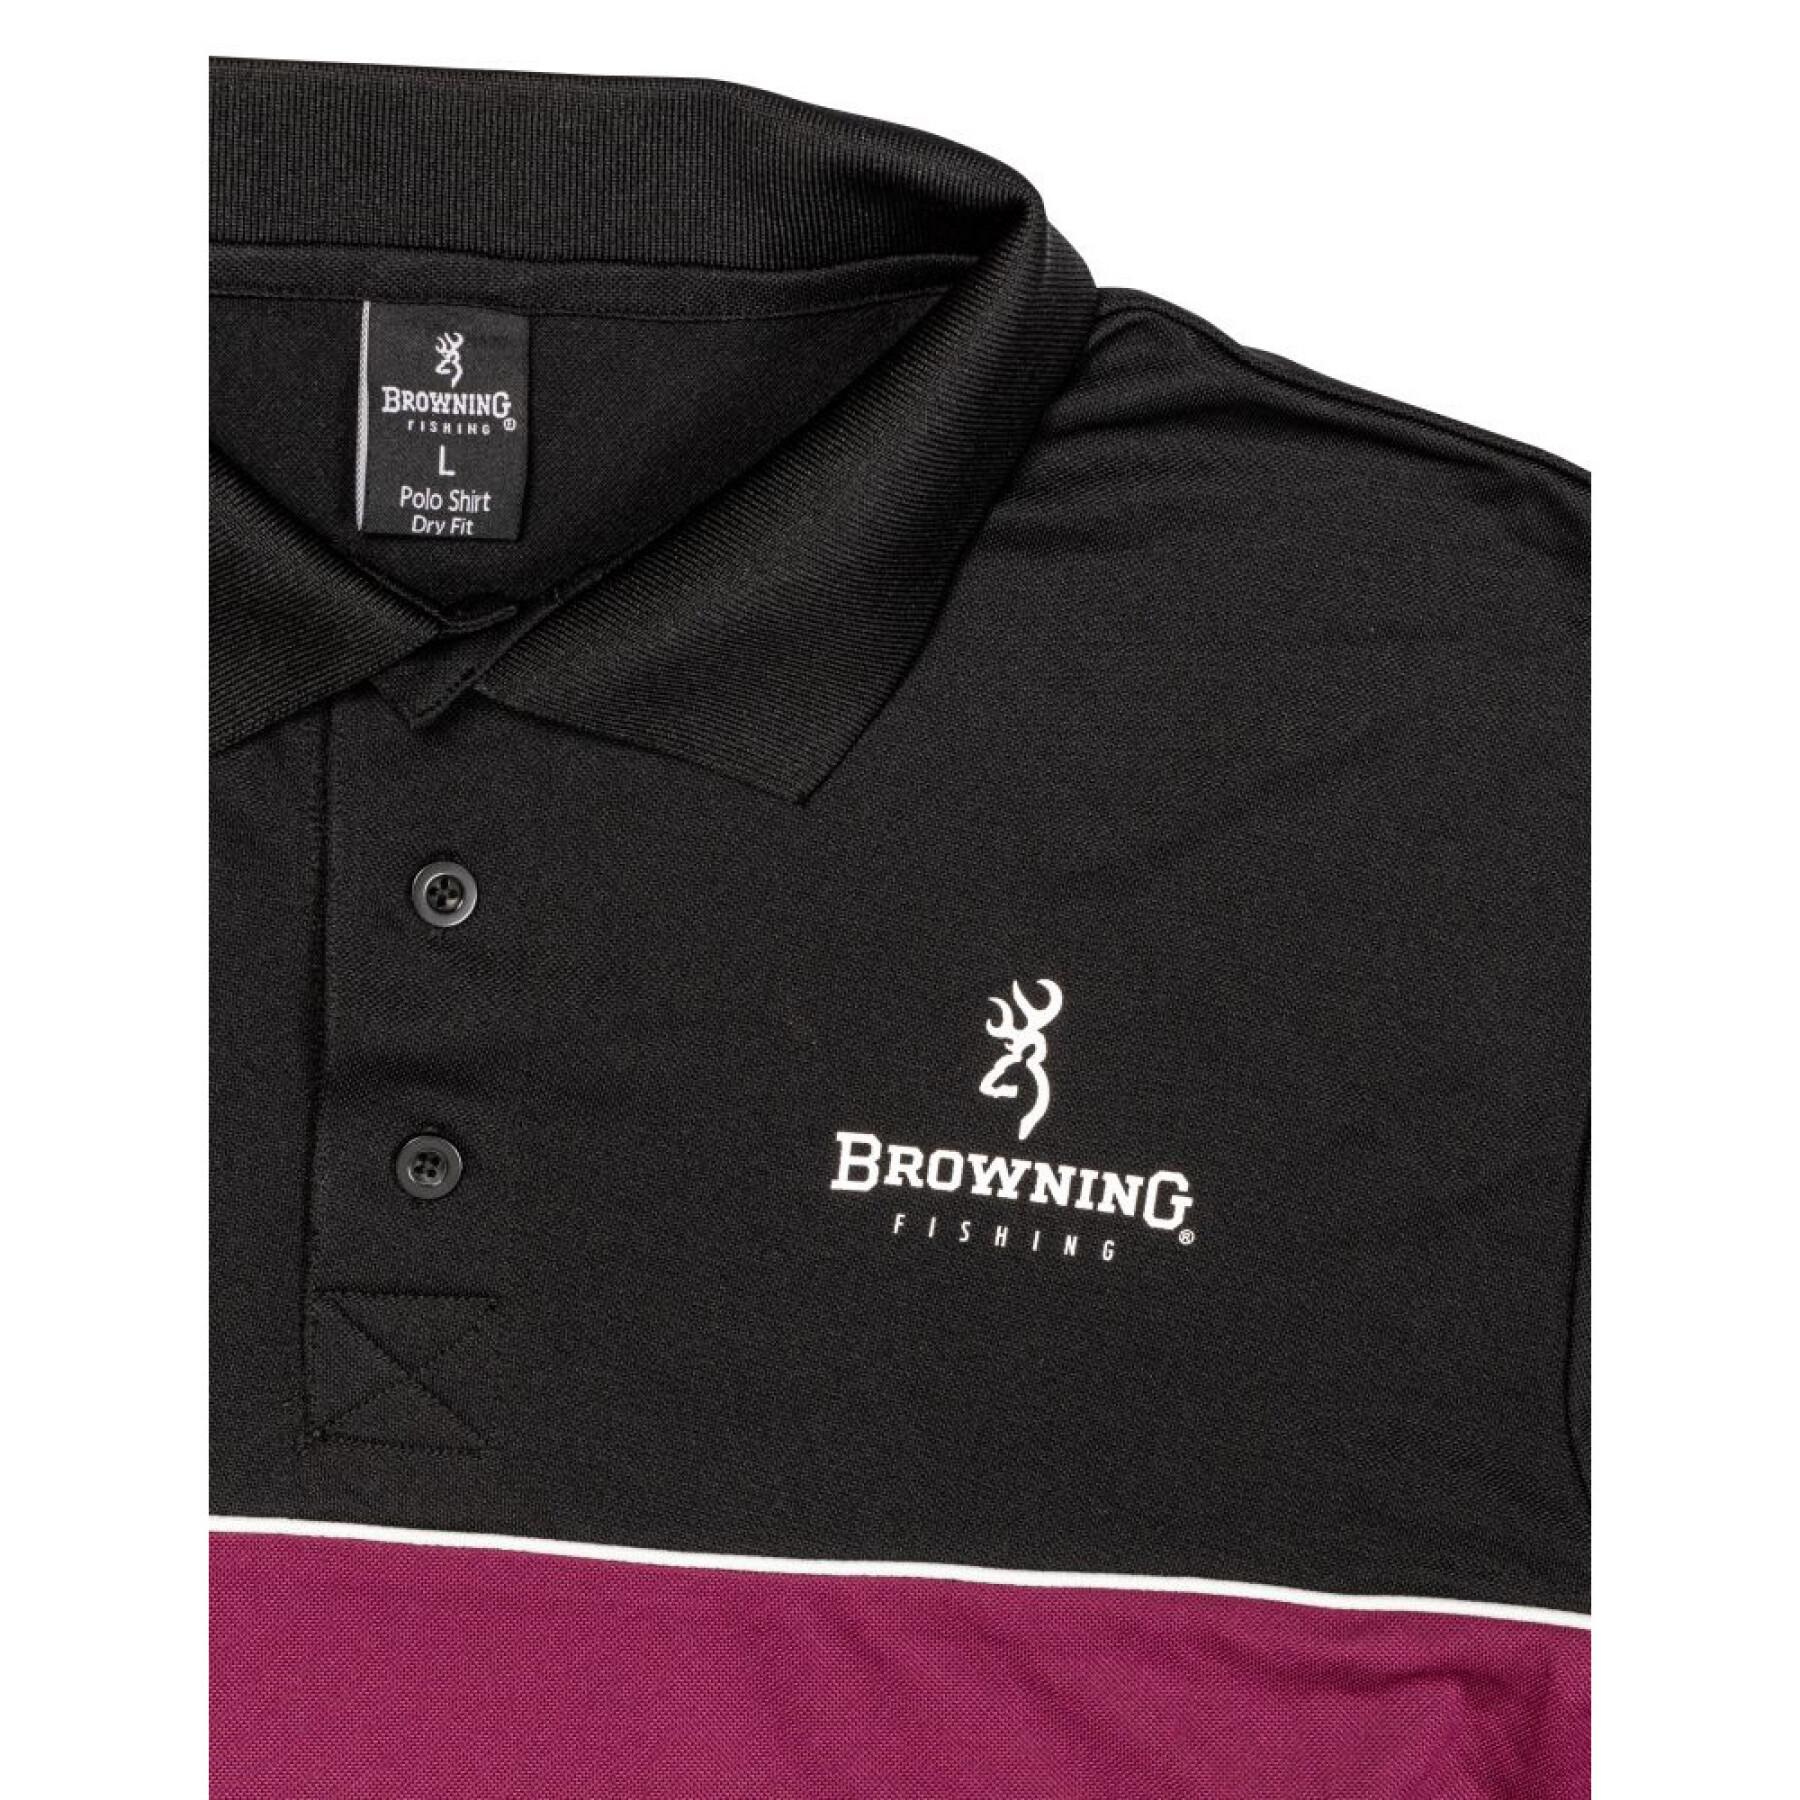 Polo dry fit Browning